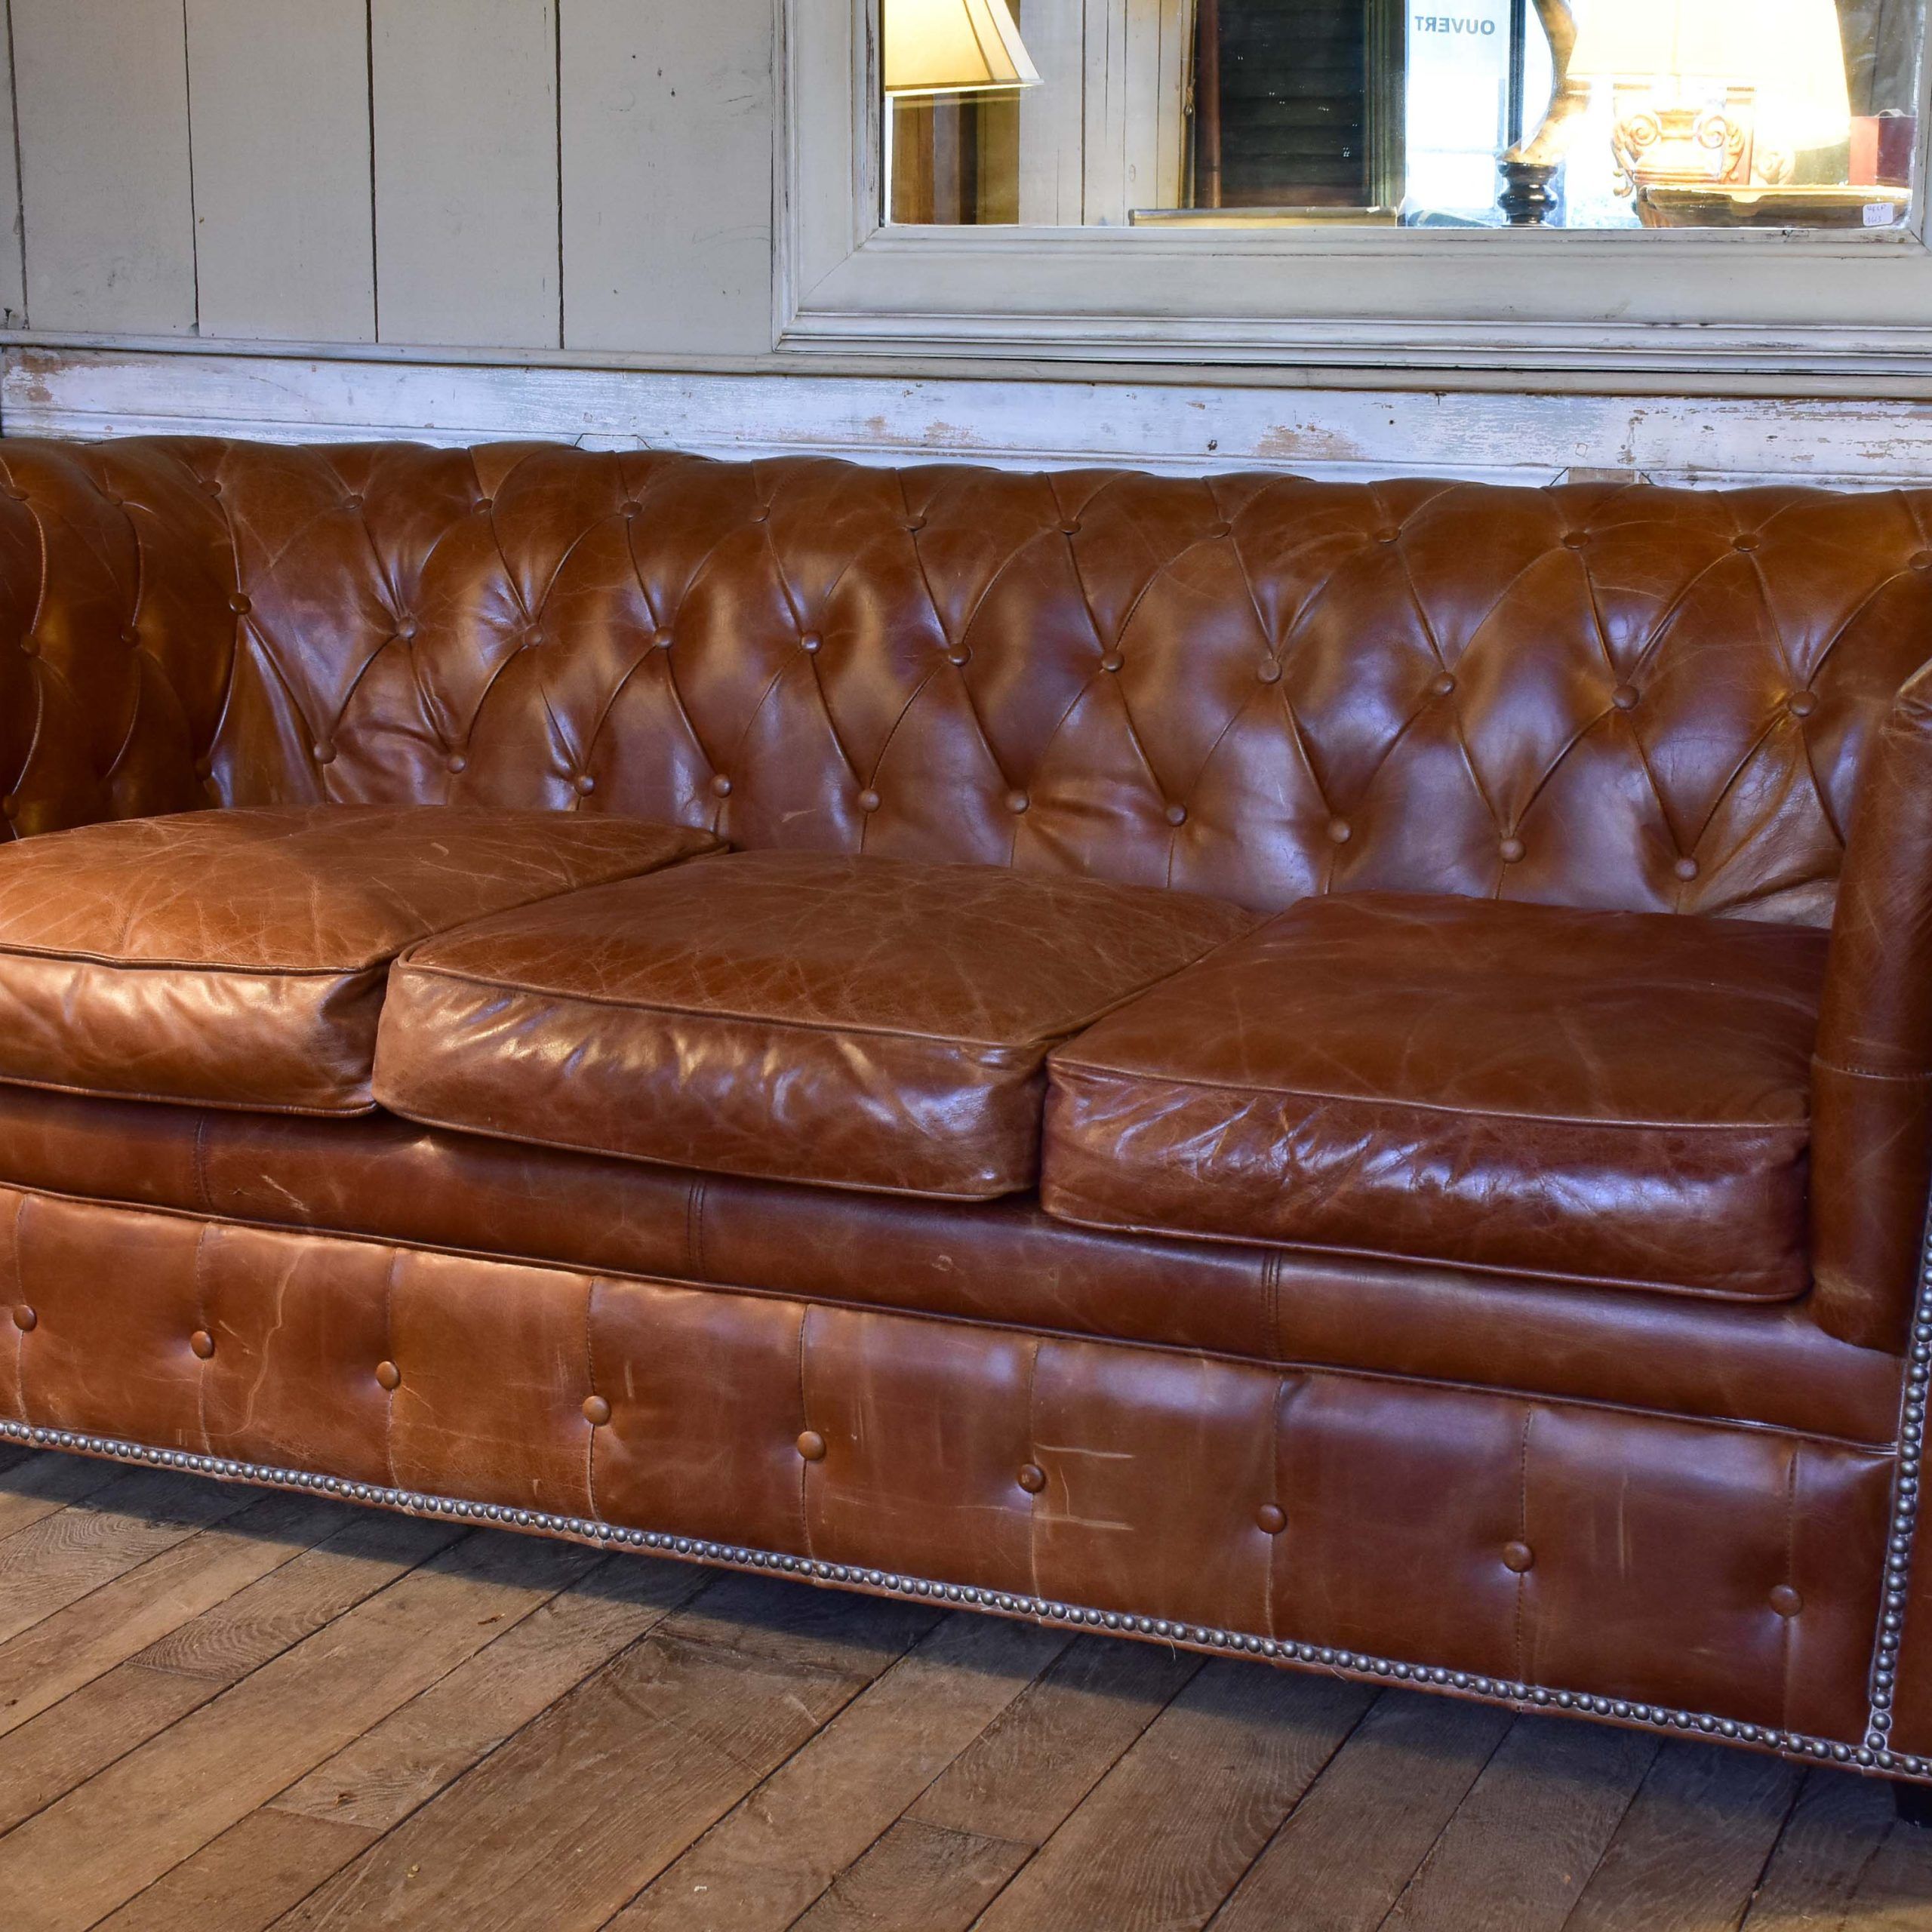 Leather Chesterfield Three Seat Sofa From The 1940’s – Chez Pluie With Regard To Chesterfield Sofas (Gallery 18 of 21)